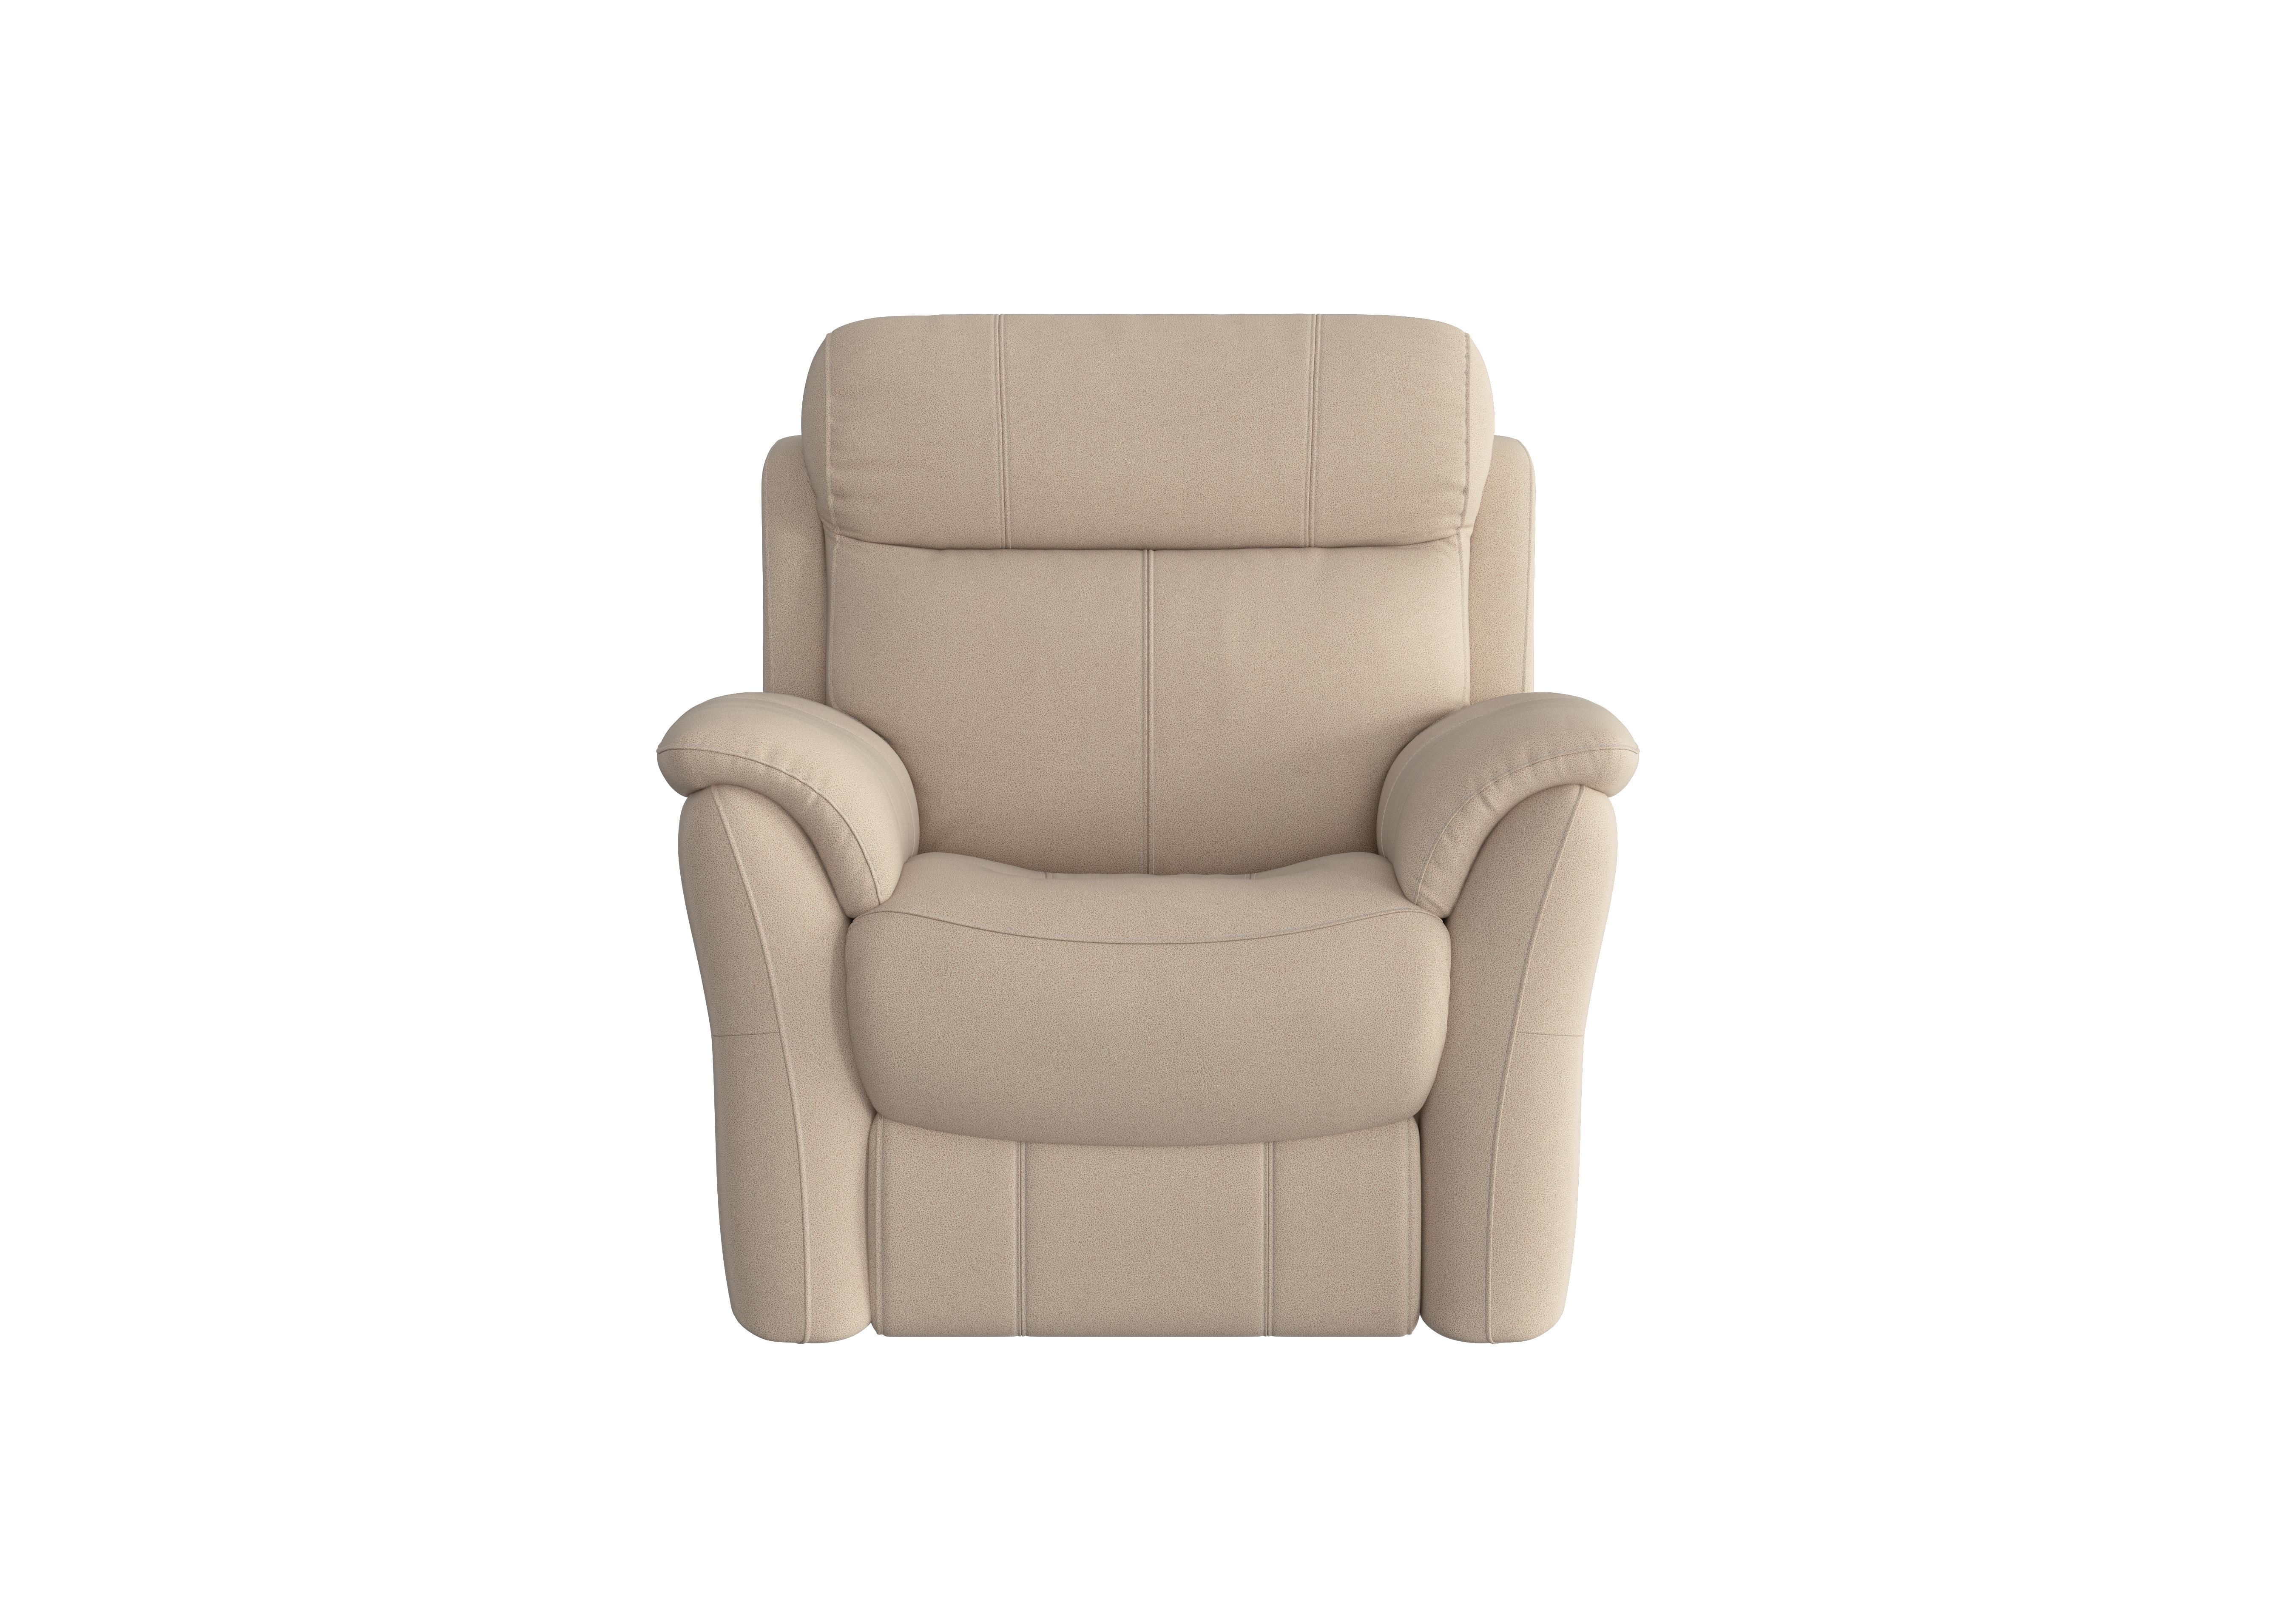 Relax Station Revive Fabric Armchair in Bfa-Blj-R20 Bisque on Furniture Village